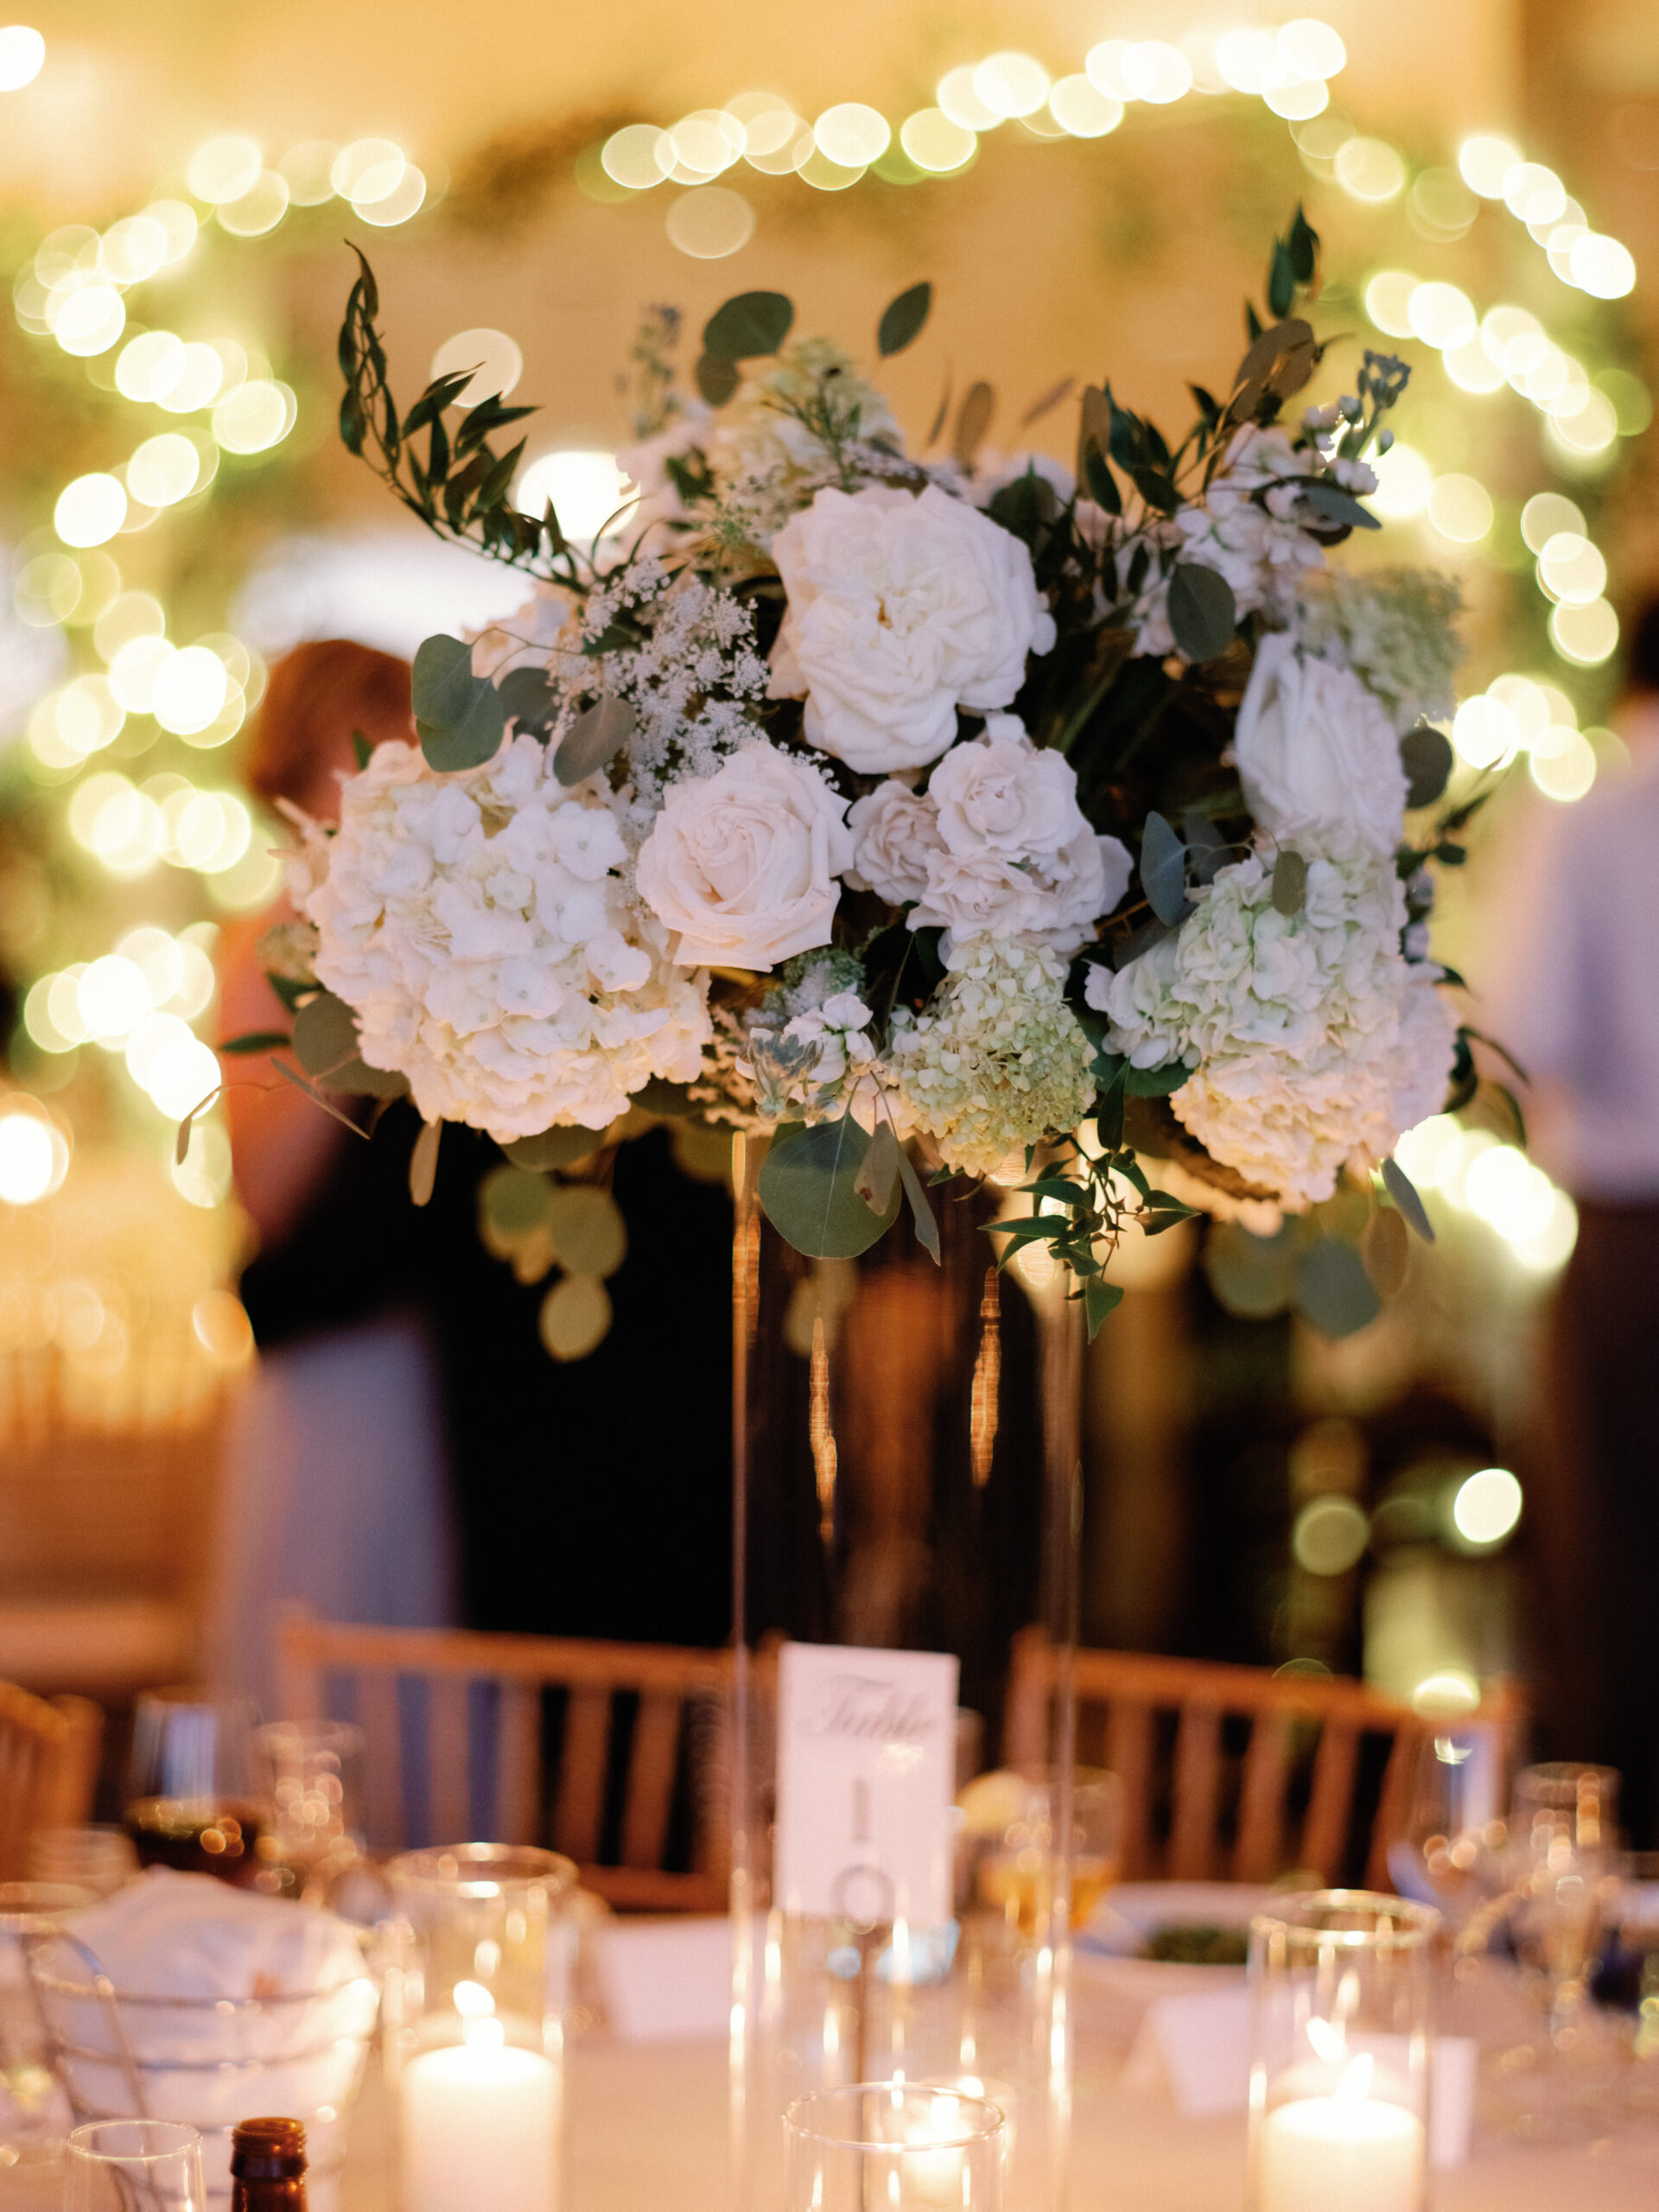 A flower bouquet centerpiece on a wedding dining table. Image by Jenny Fu Studio